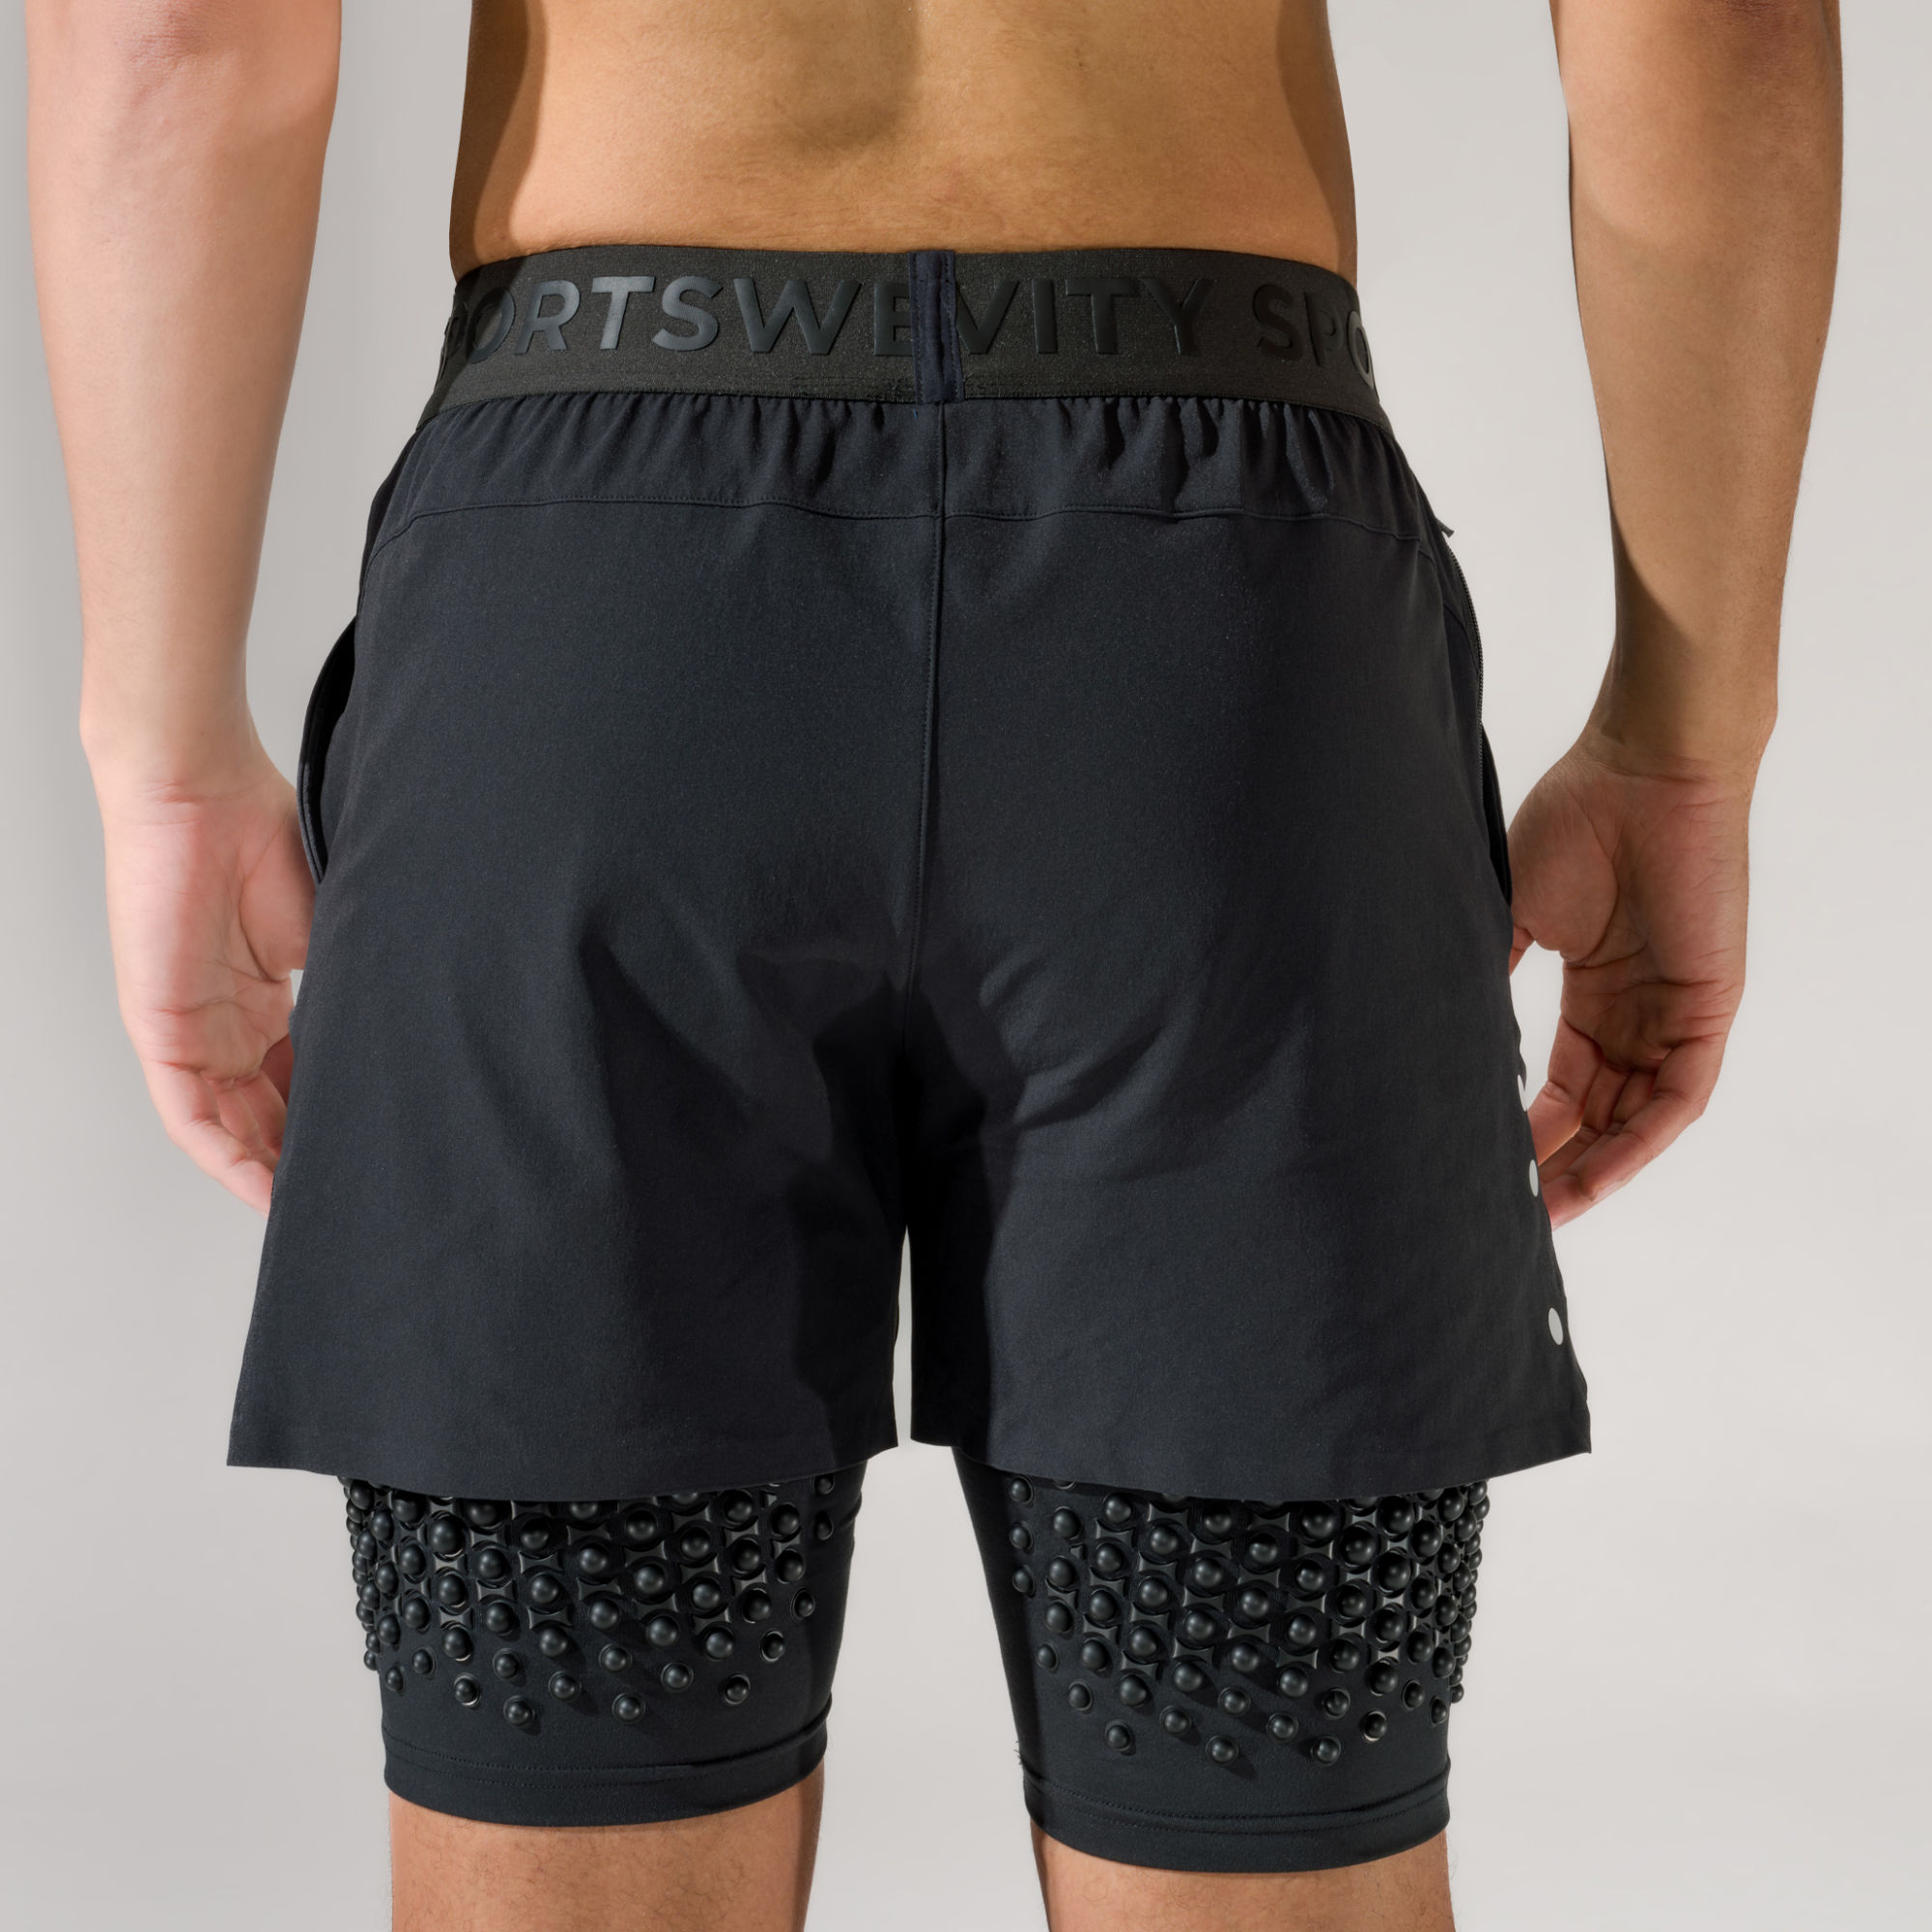 OMORPHO M G-Short Black weighted workout shorts - back view